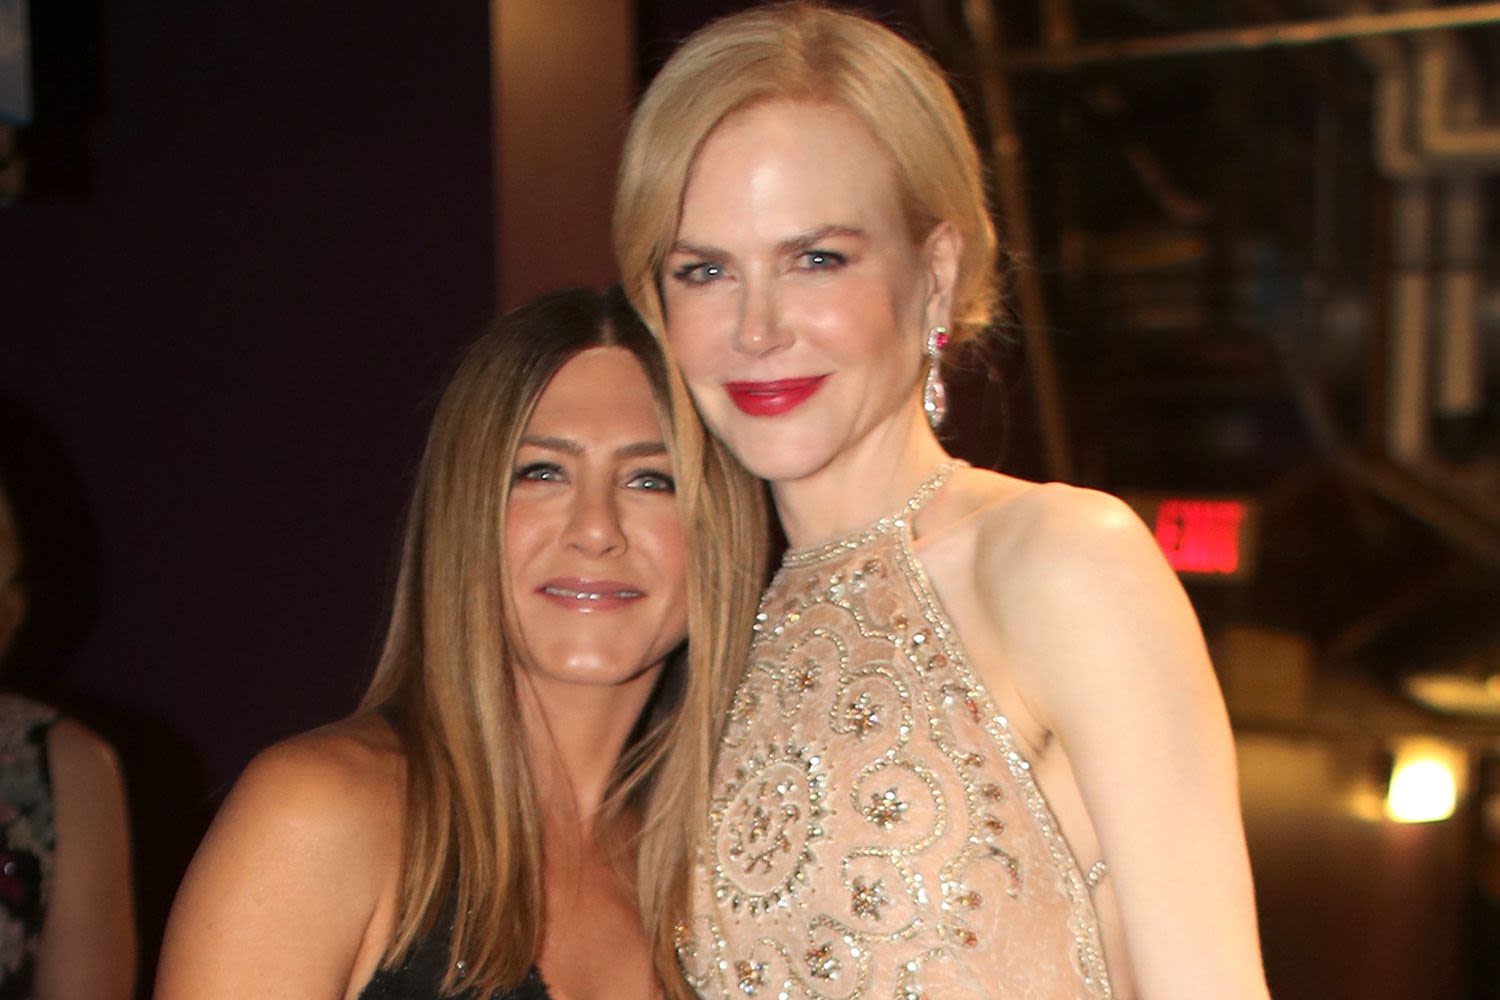 Jennifer Aniston Says Nicole Kidman Helped Her Through 'a Lot of Hard Things' While Making “Just Go with It”